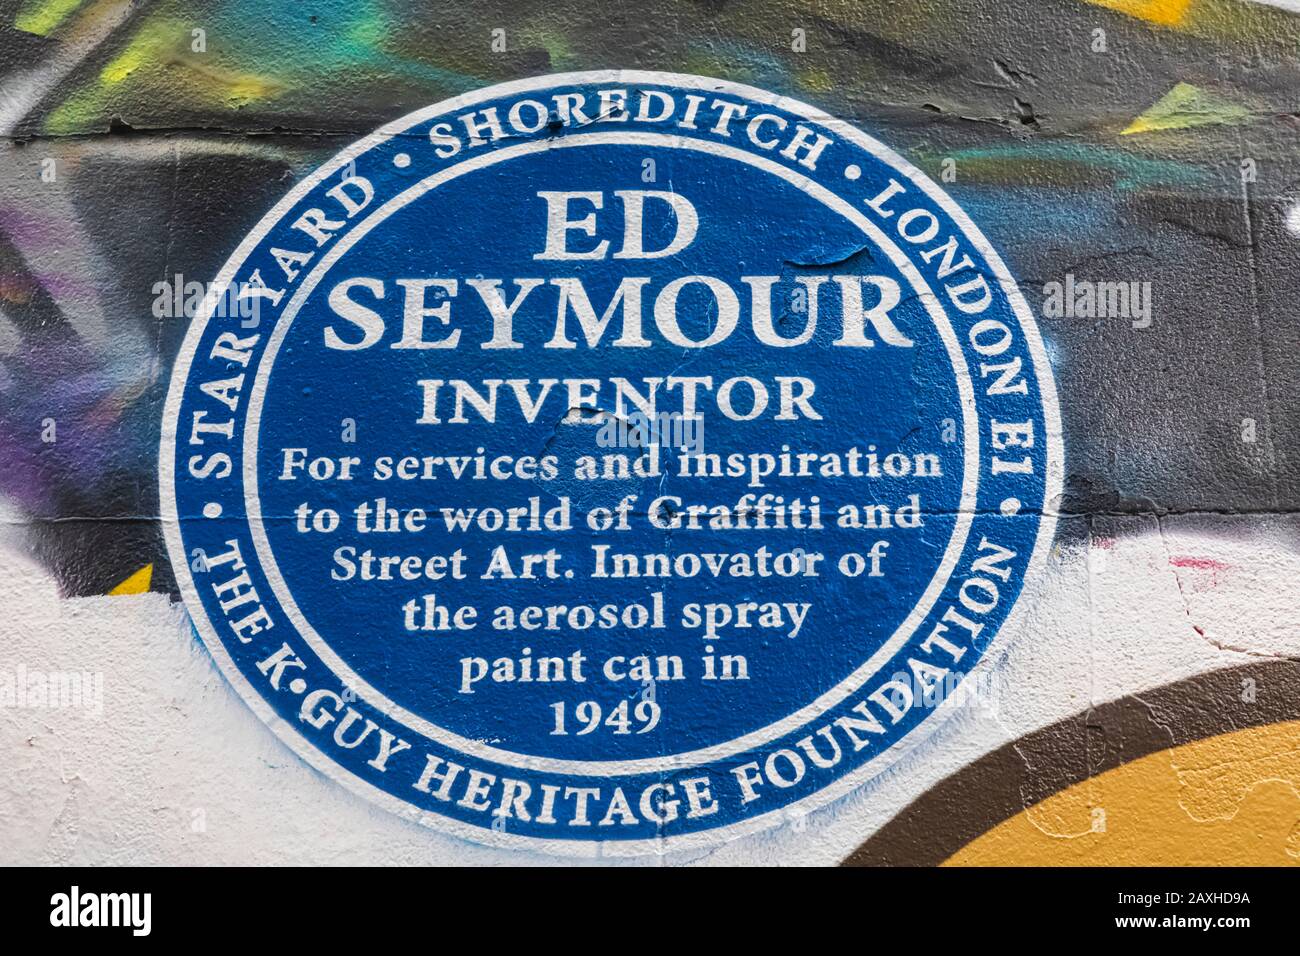 England, London, Shoreditch, Wall Art depicting Blue Plaque for Ed Seymour Inovator of the Aerosol Spray Paint Can in 1949 Stock Photo